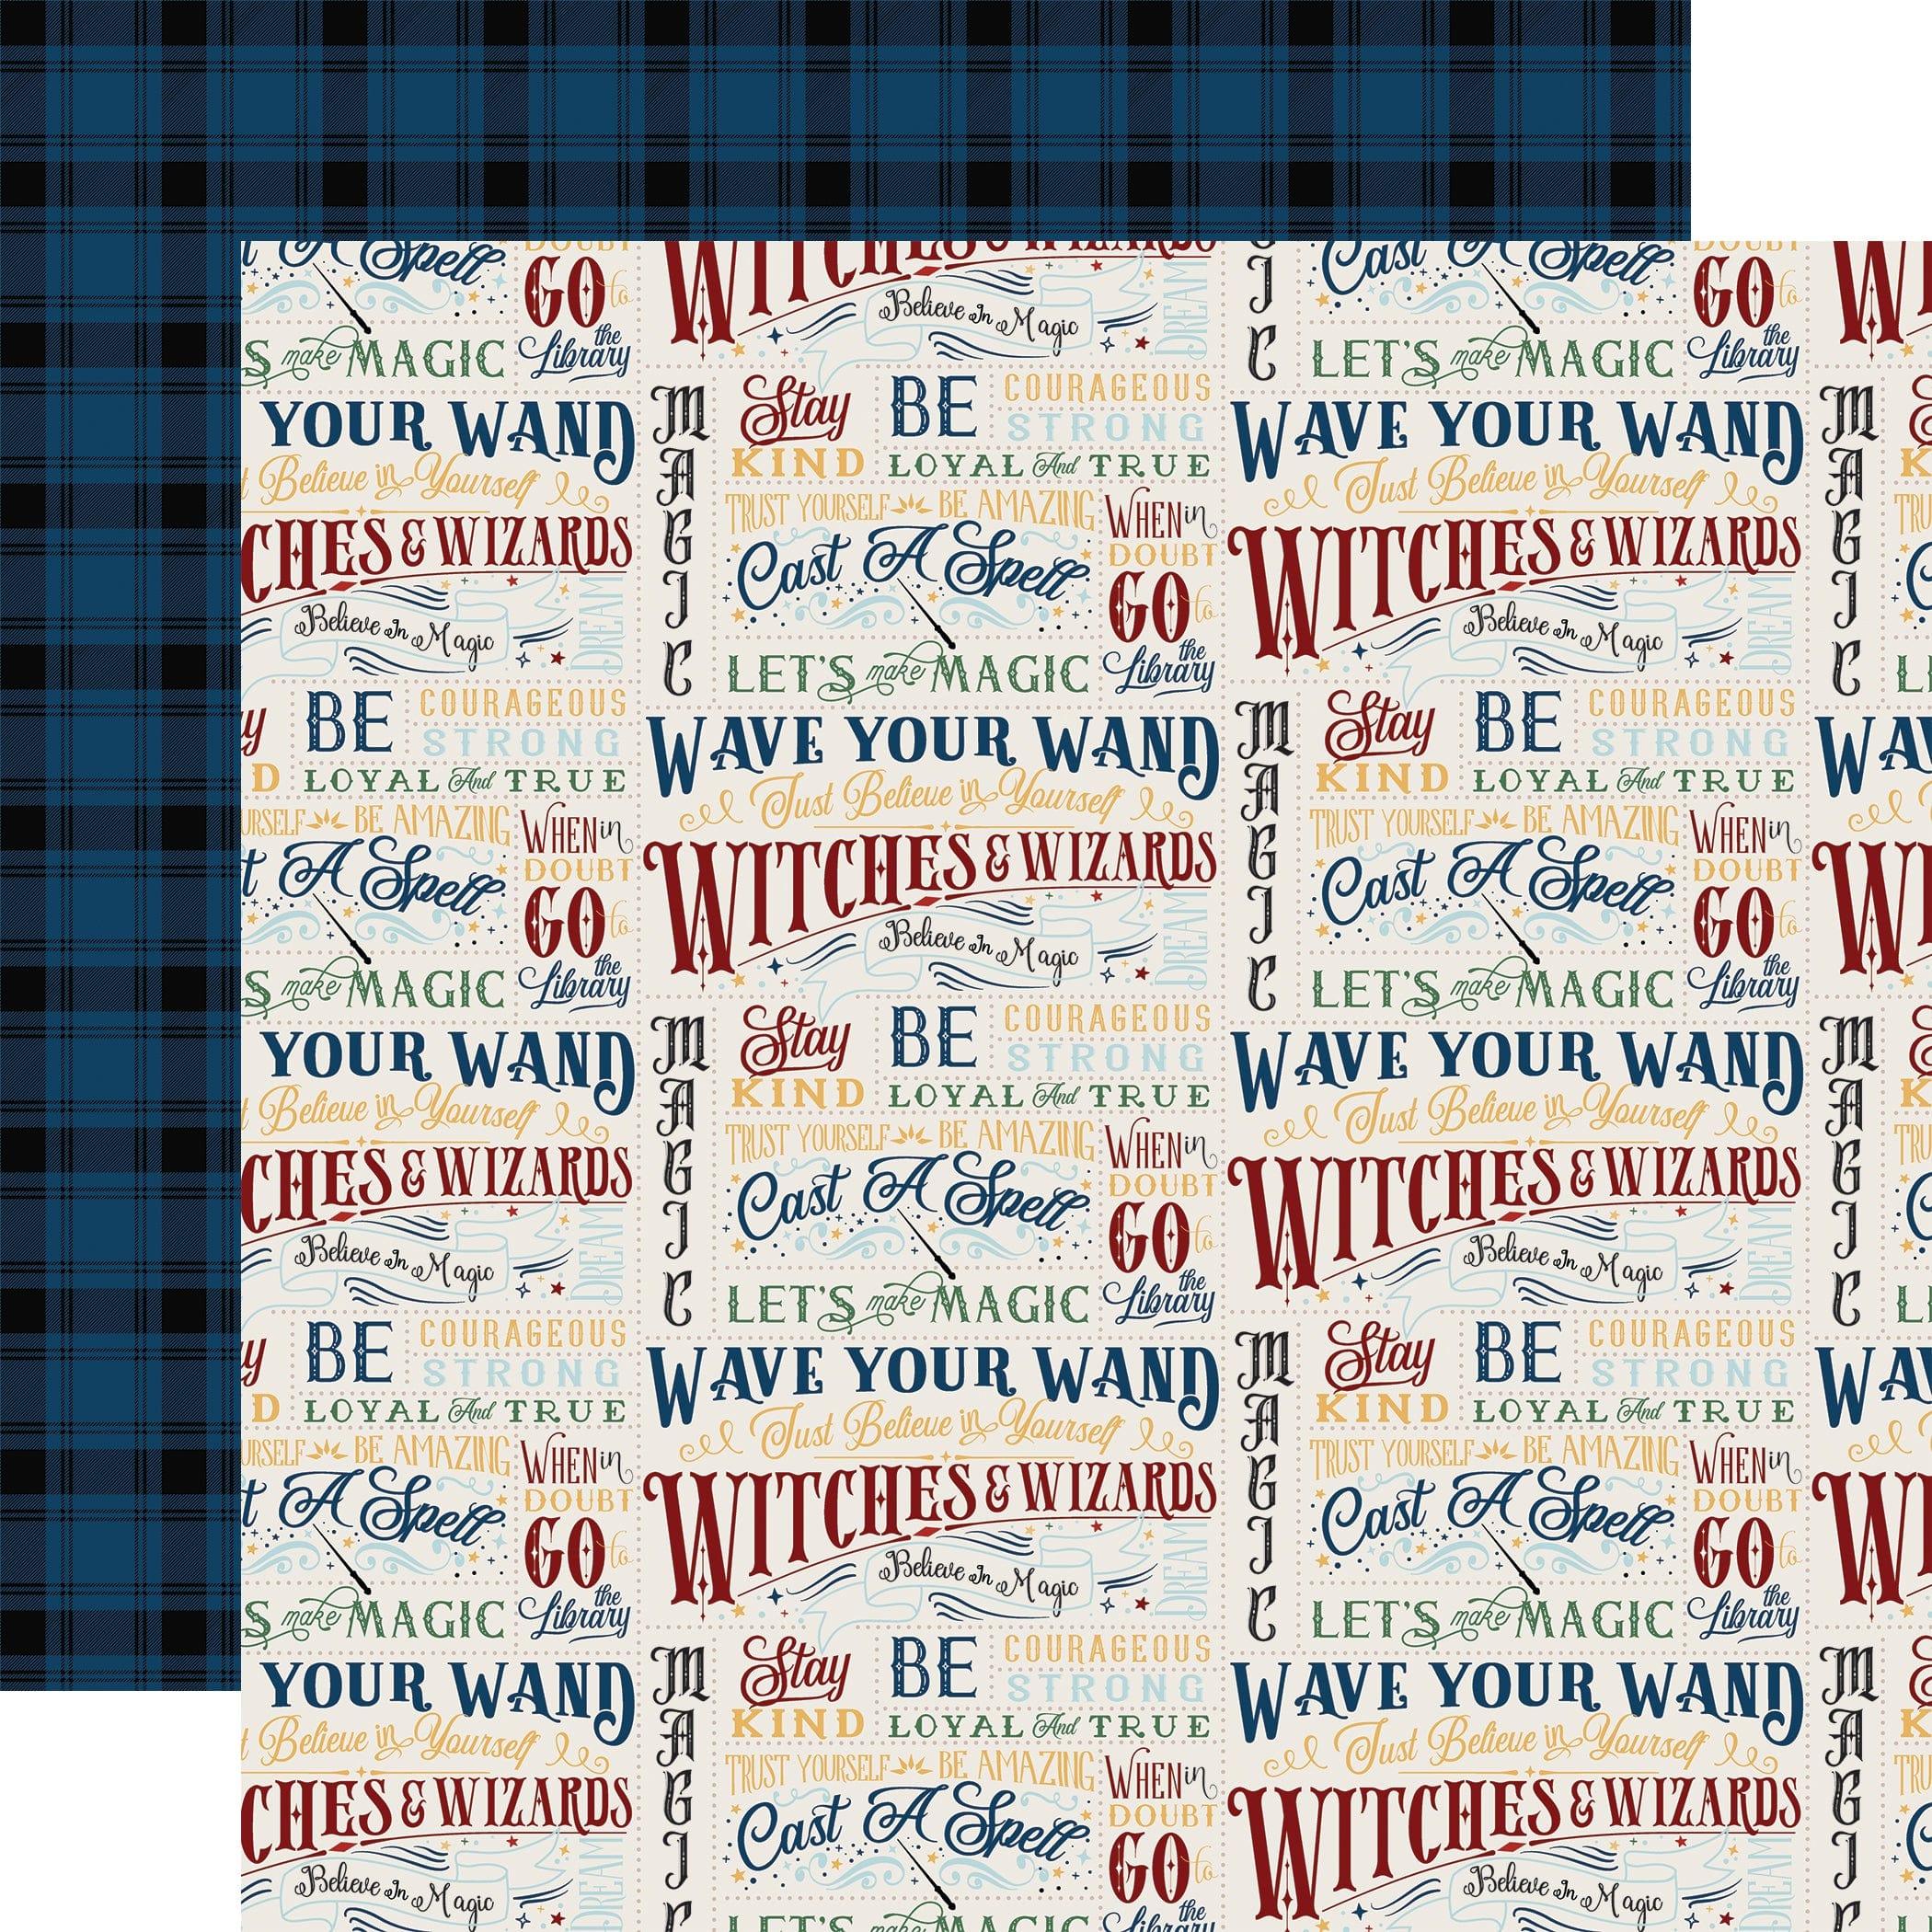 Wizards & Company Collection Wave Your Wand 12 x 12 Double-Sided Scrapbook Paper by Echo Park Paper - Scrapbook Supply Companies